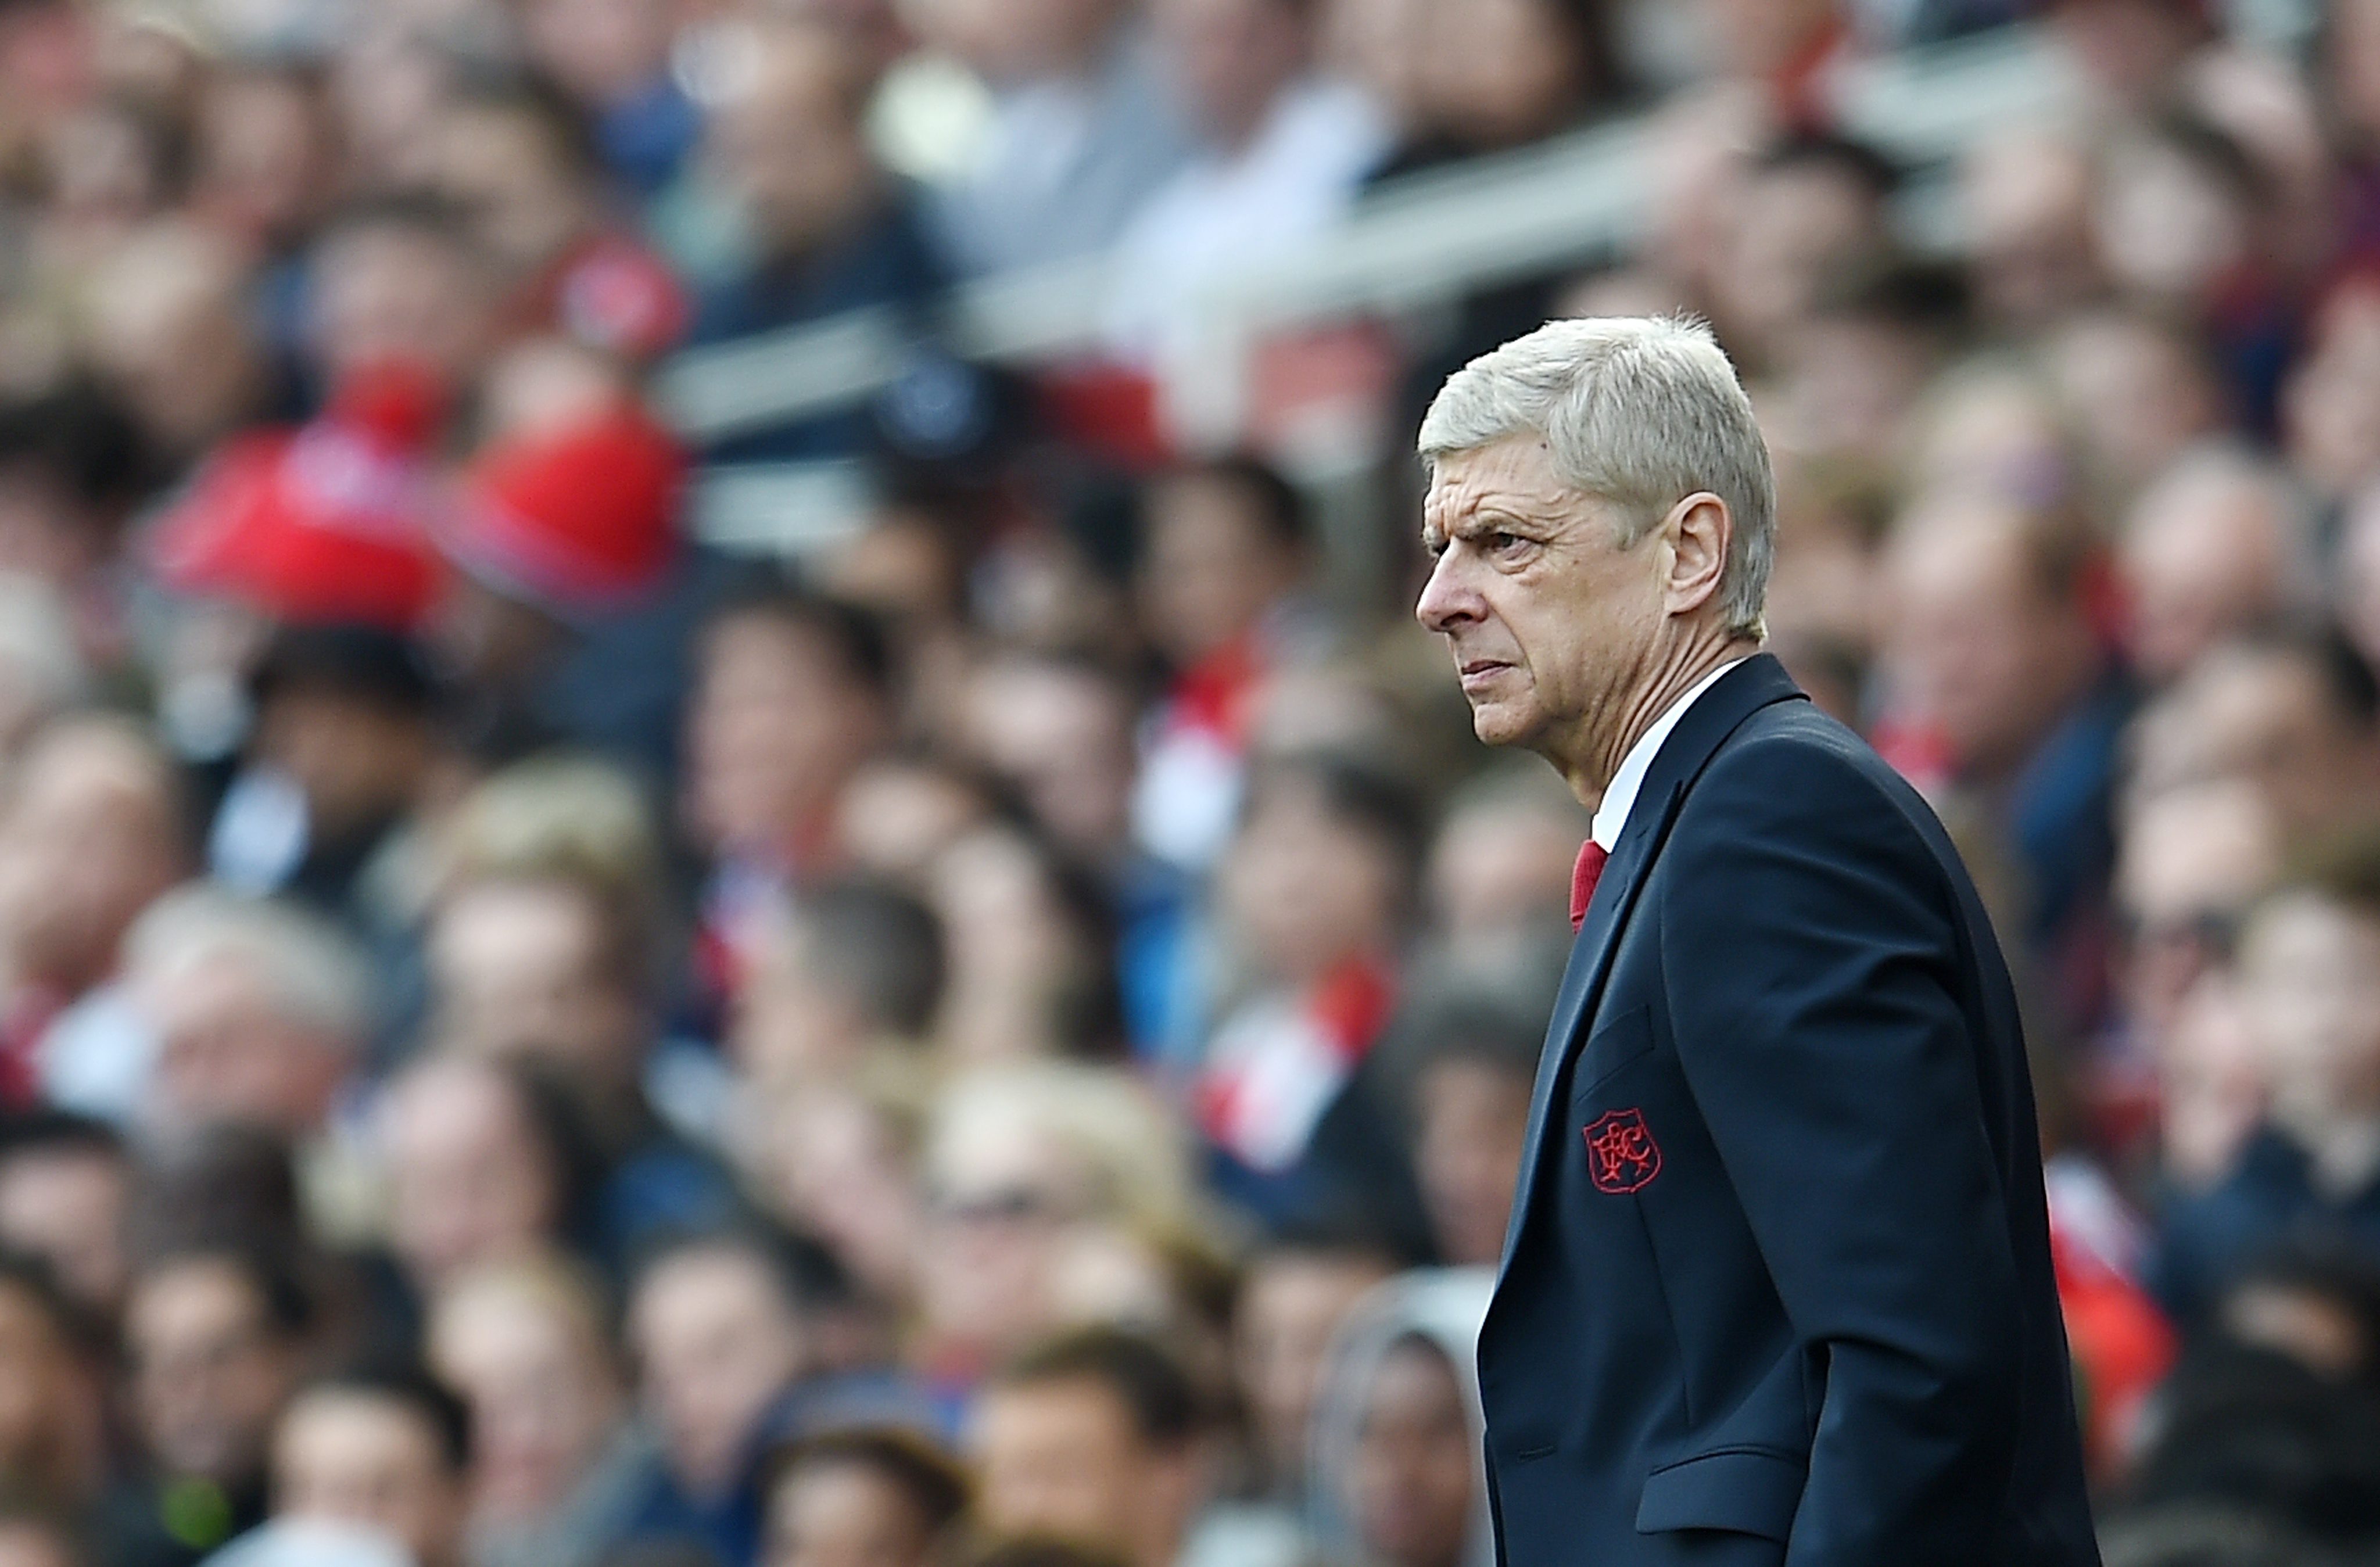 Wenger begins his 21st year in charge of Arsenal (Photo courtesy EPA/ANDY RAIN)